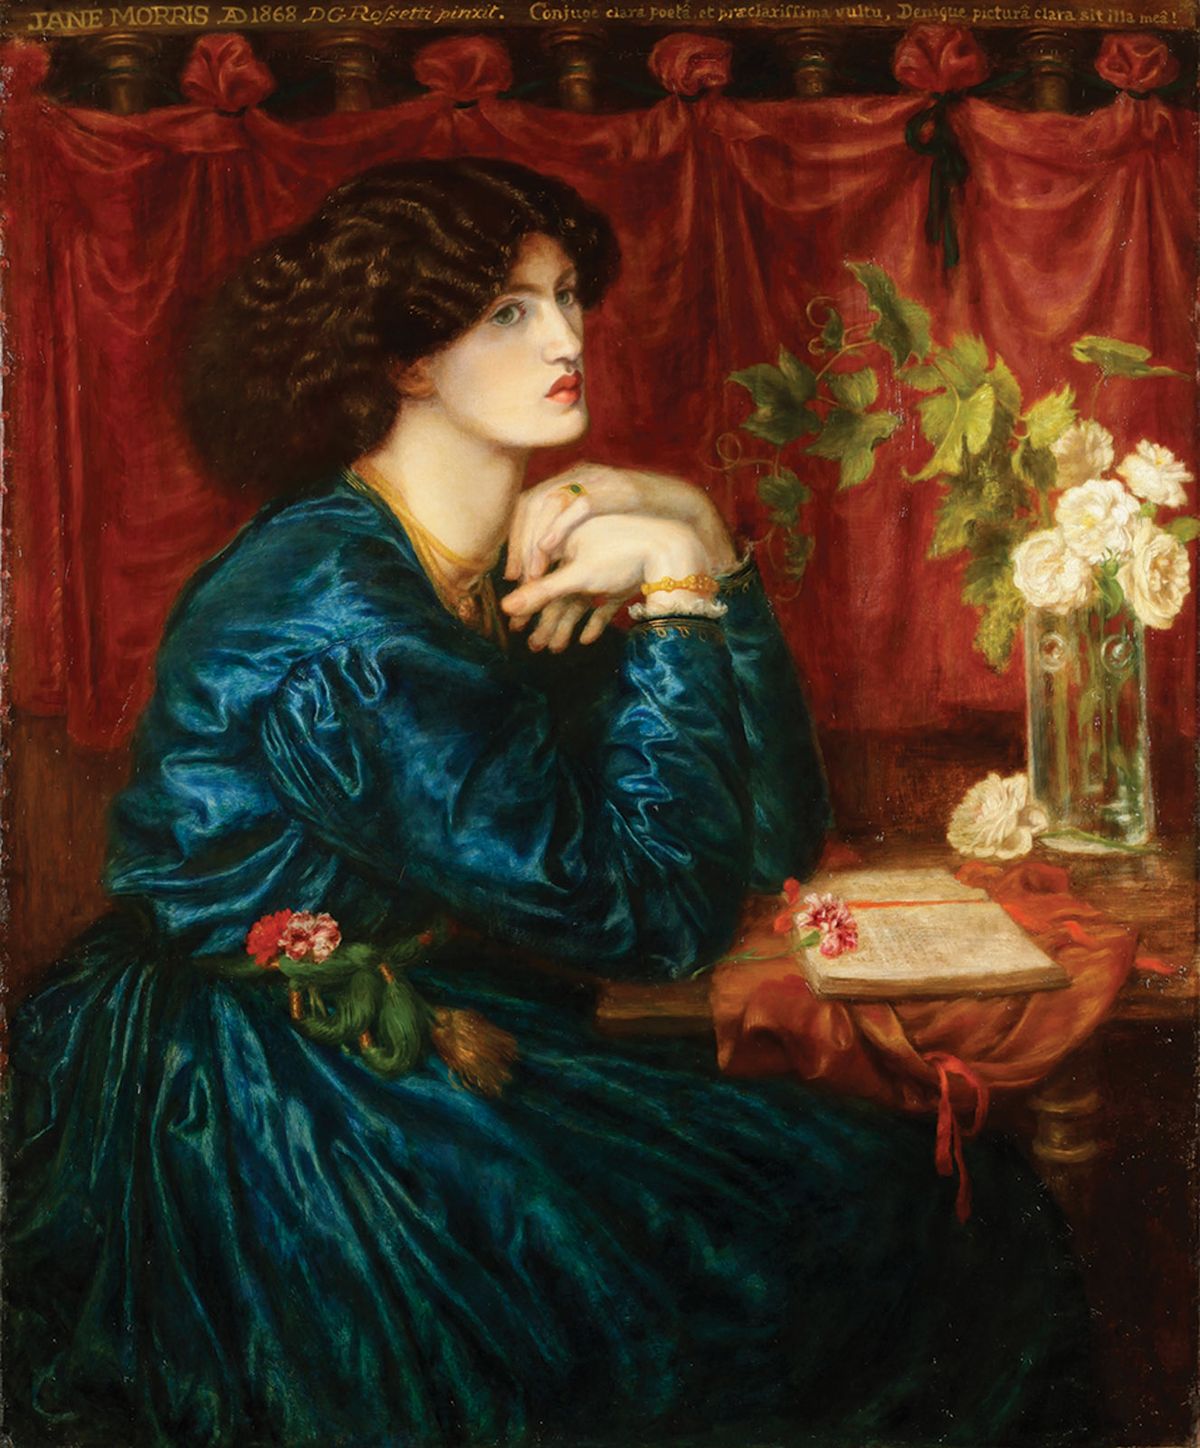 Rossetti’s 1868 painting Blue Silk Dress (Jane Morris). The artist would later add the copper hair of his late wife to a painting of Morris as Proserpine, the queen of the underworld © Society of Antiquaries of London; Kelmscott Manor